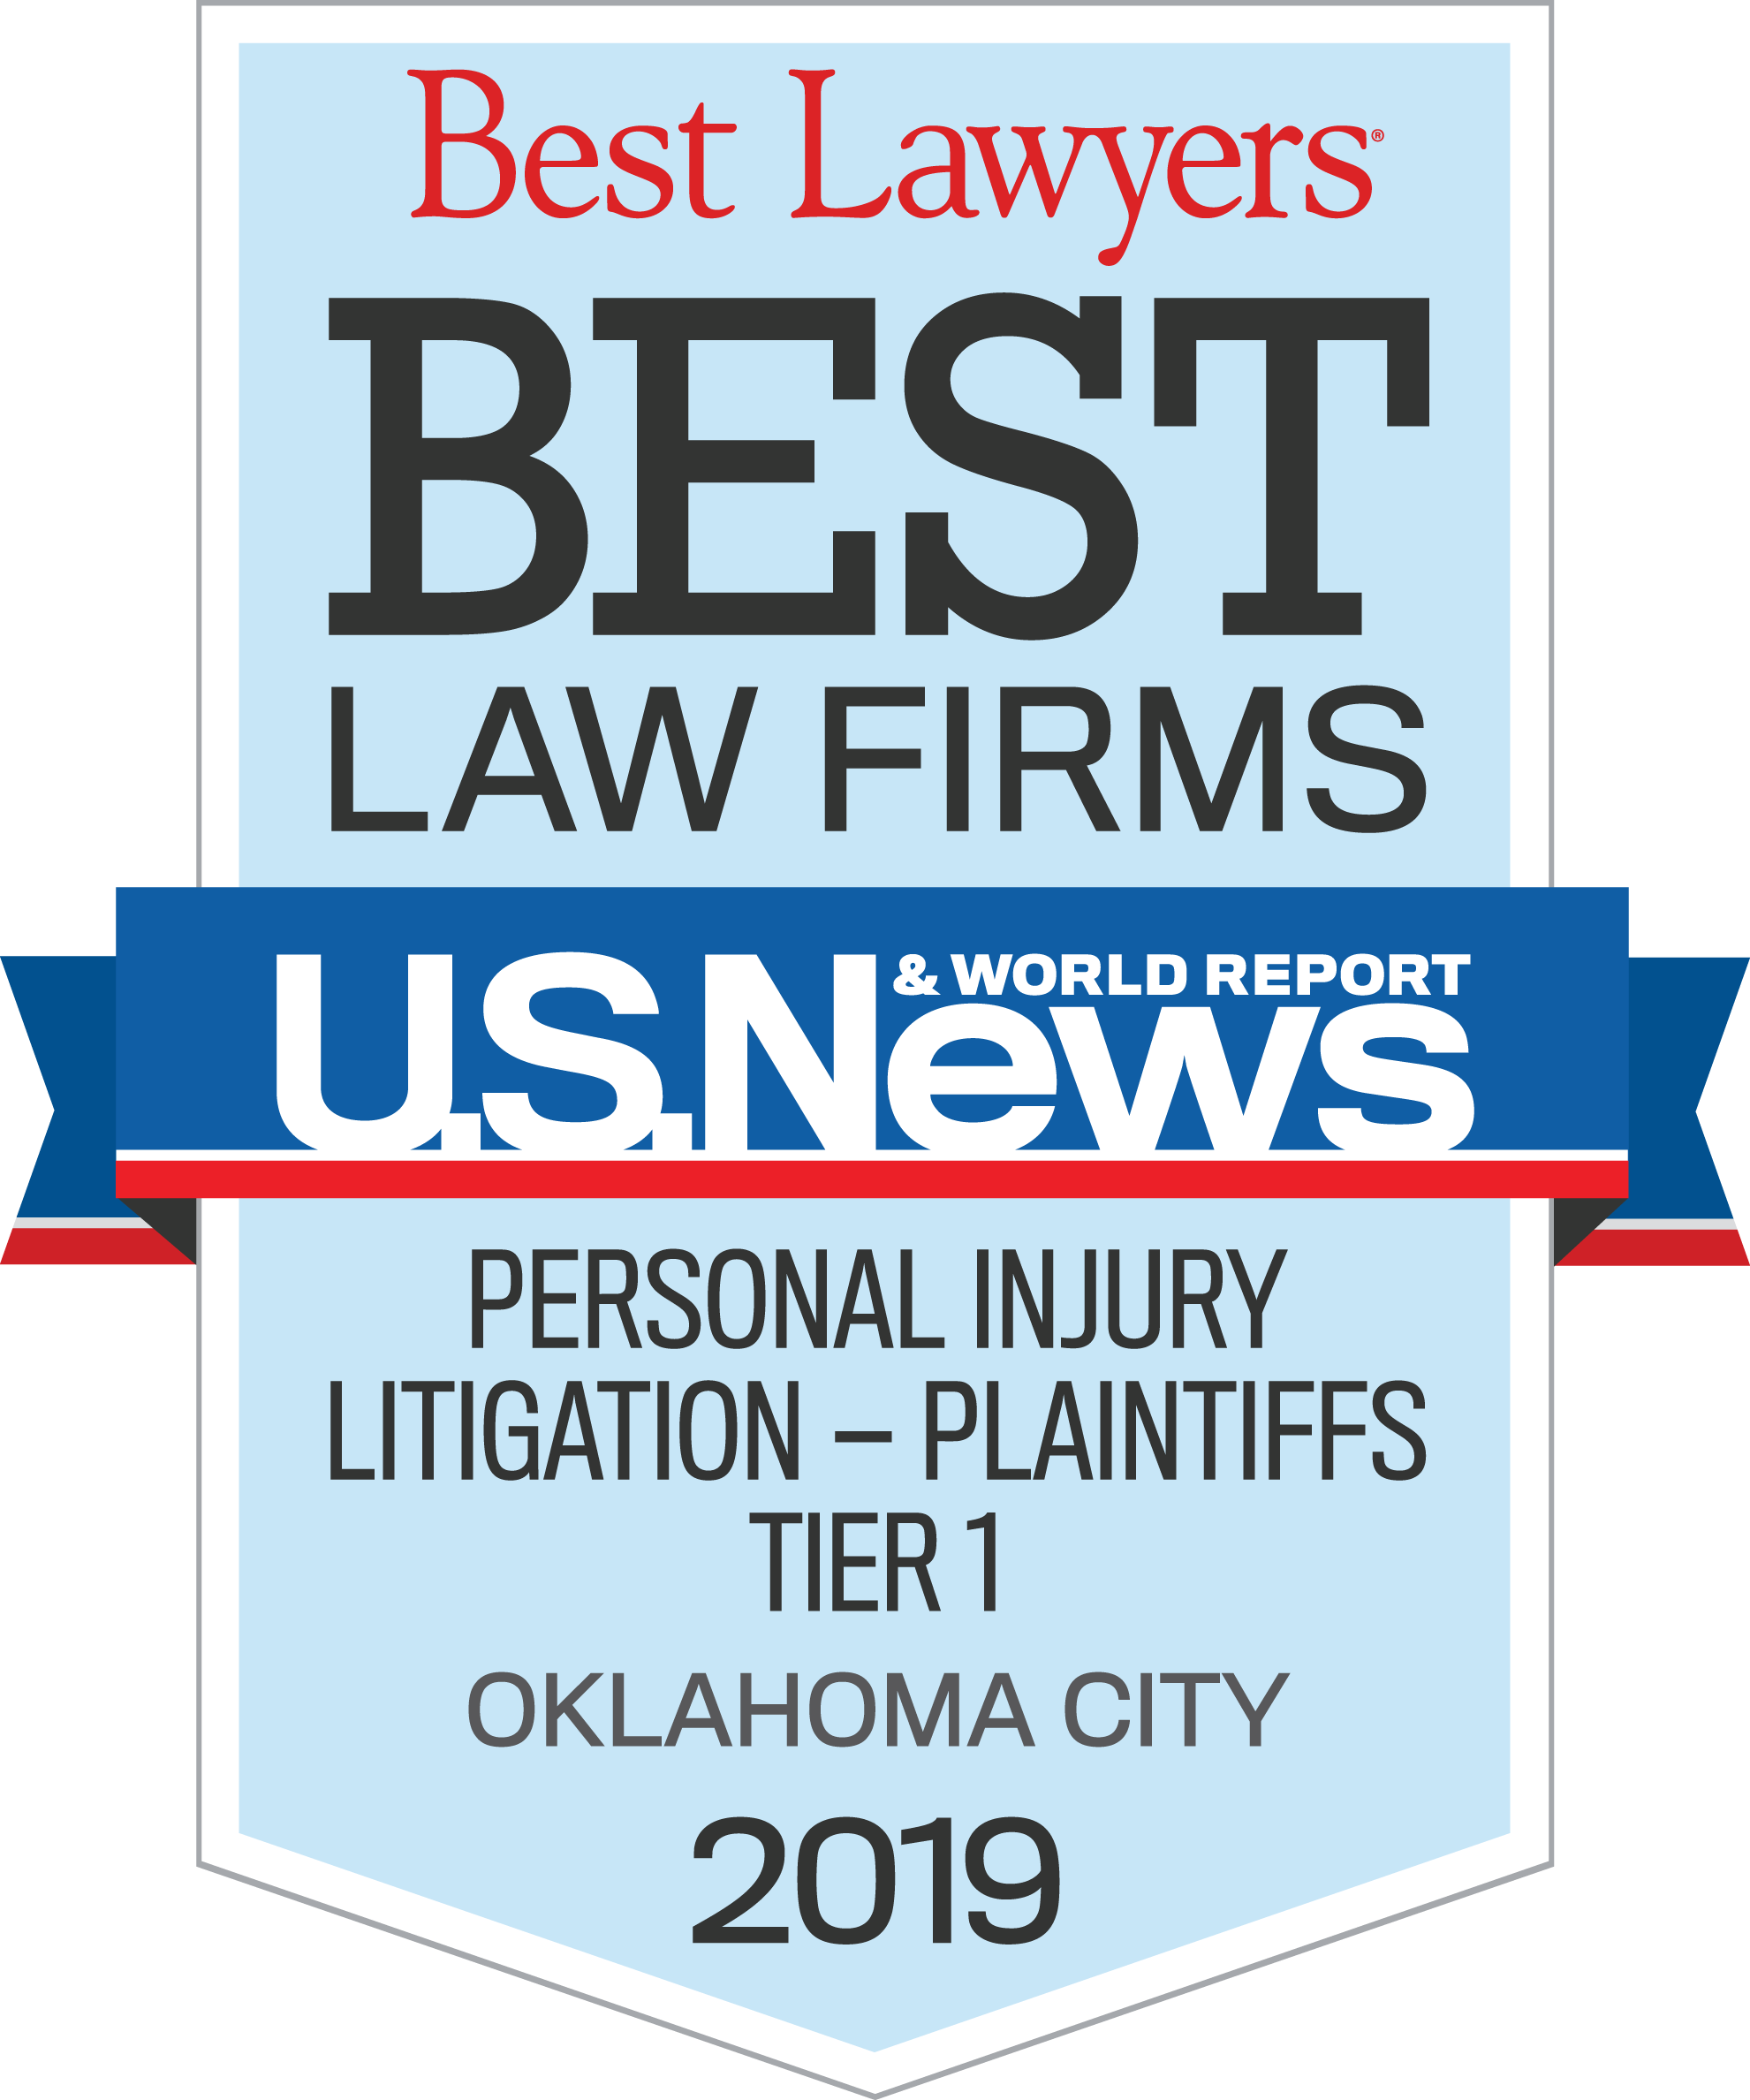 Best Lawyers Global Business Edition 2017 by Best Lawyers - Issuu